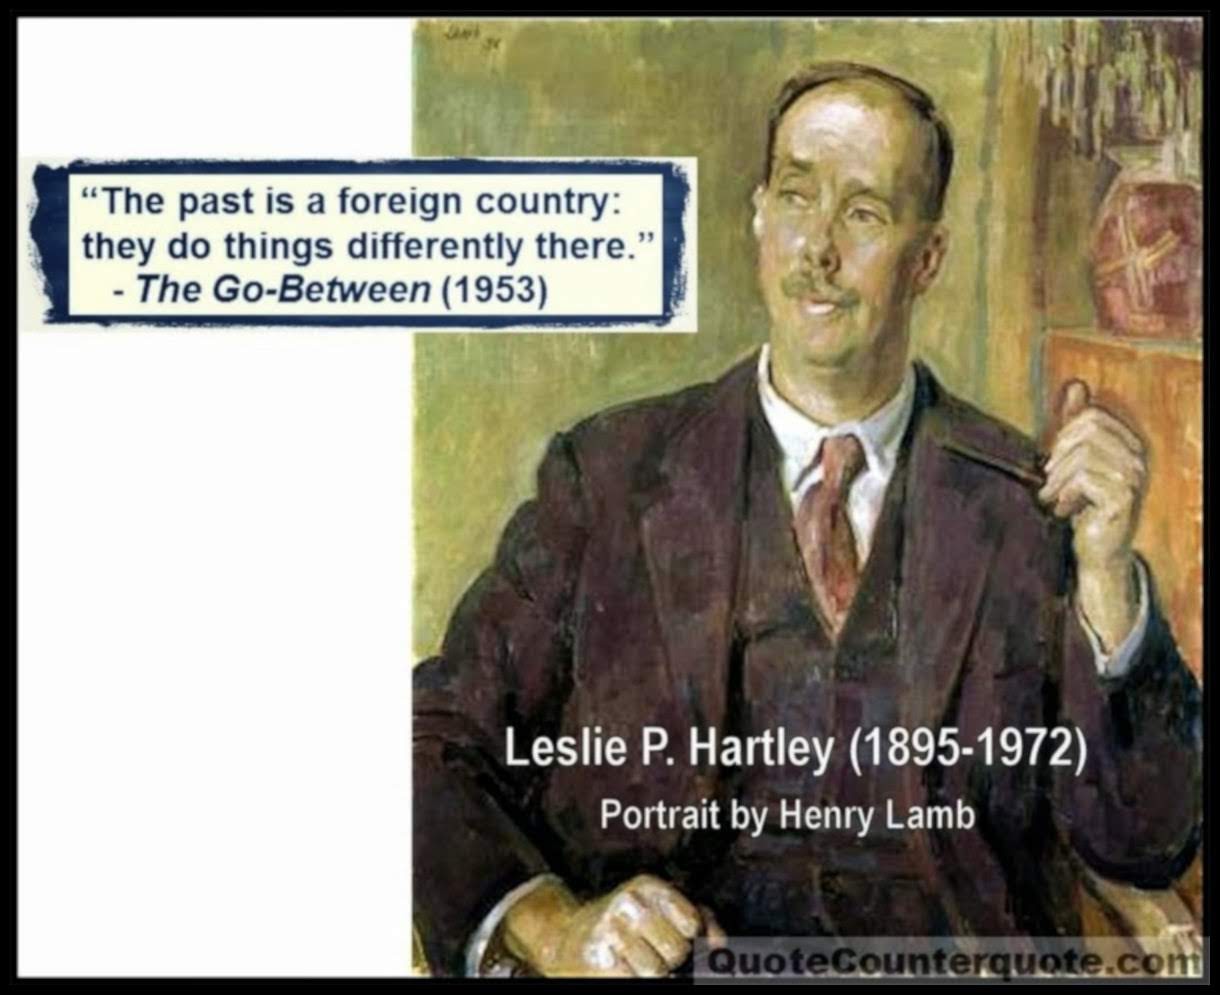 Quote/Counterquote: “The Past Is A Foreign Country...”